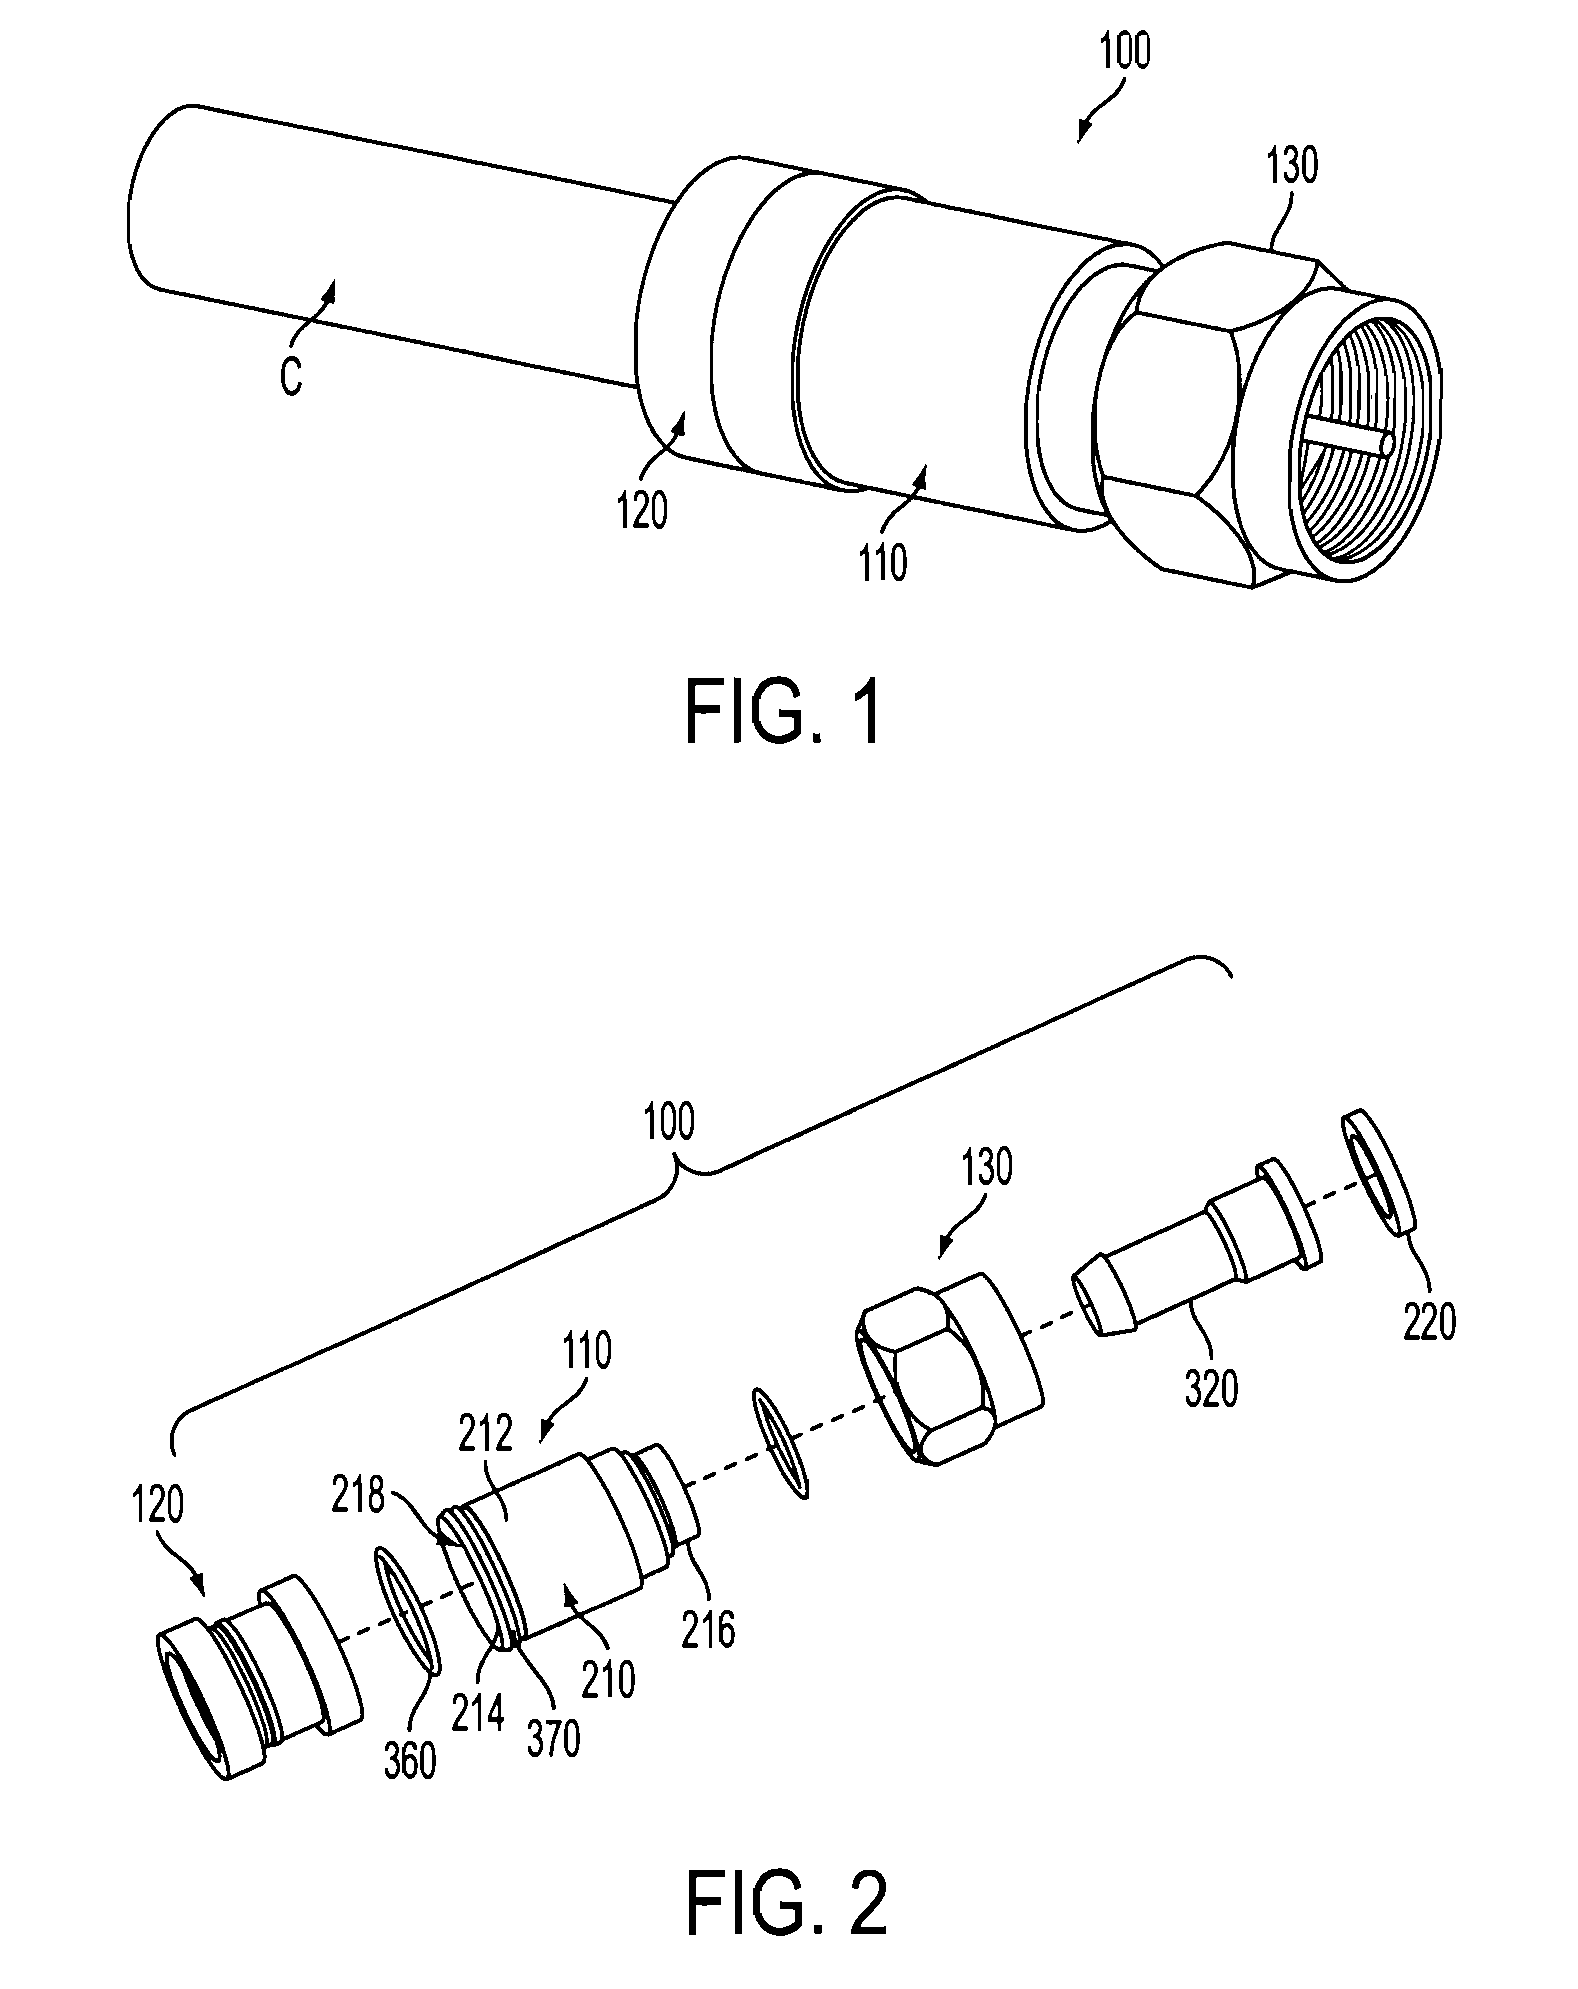 Coaxial connector with locking sleeve for terminating cable